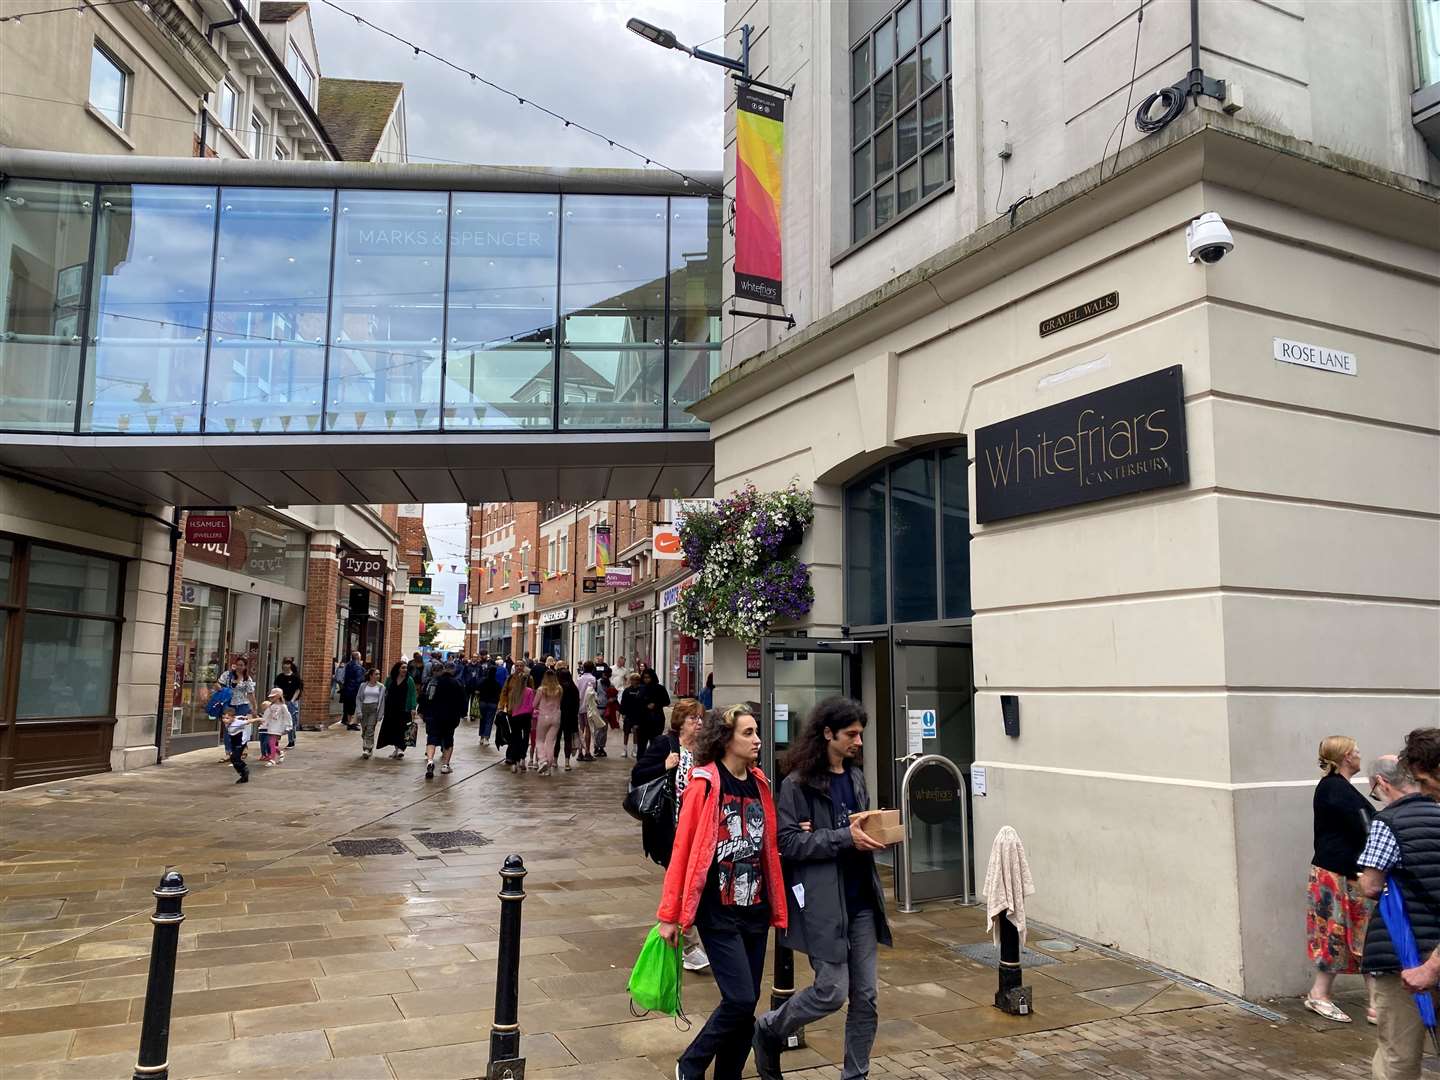 Whitefriars shopping centre in Canterbury, which the city council bought for £154 million